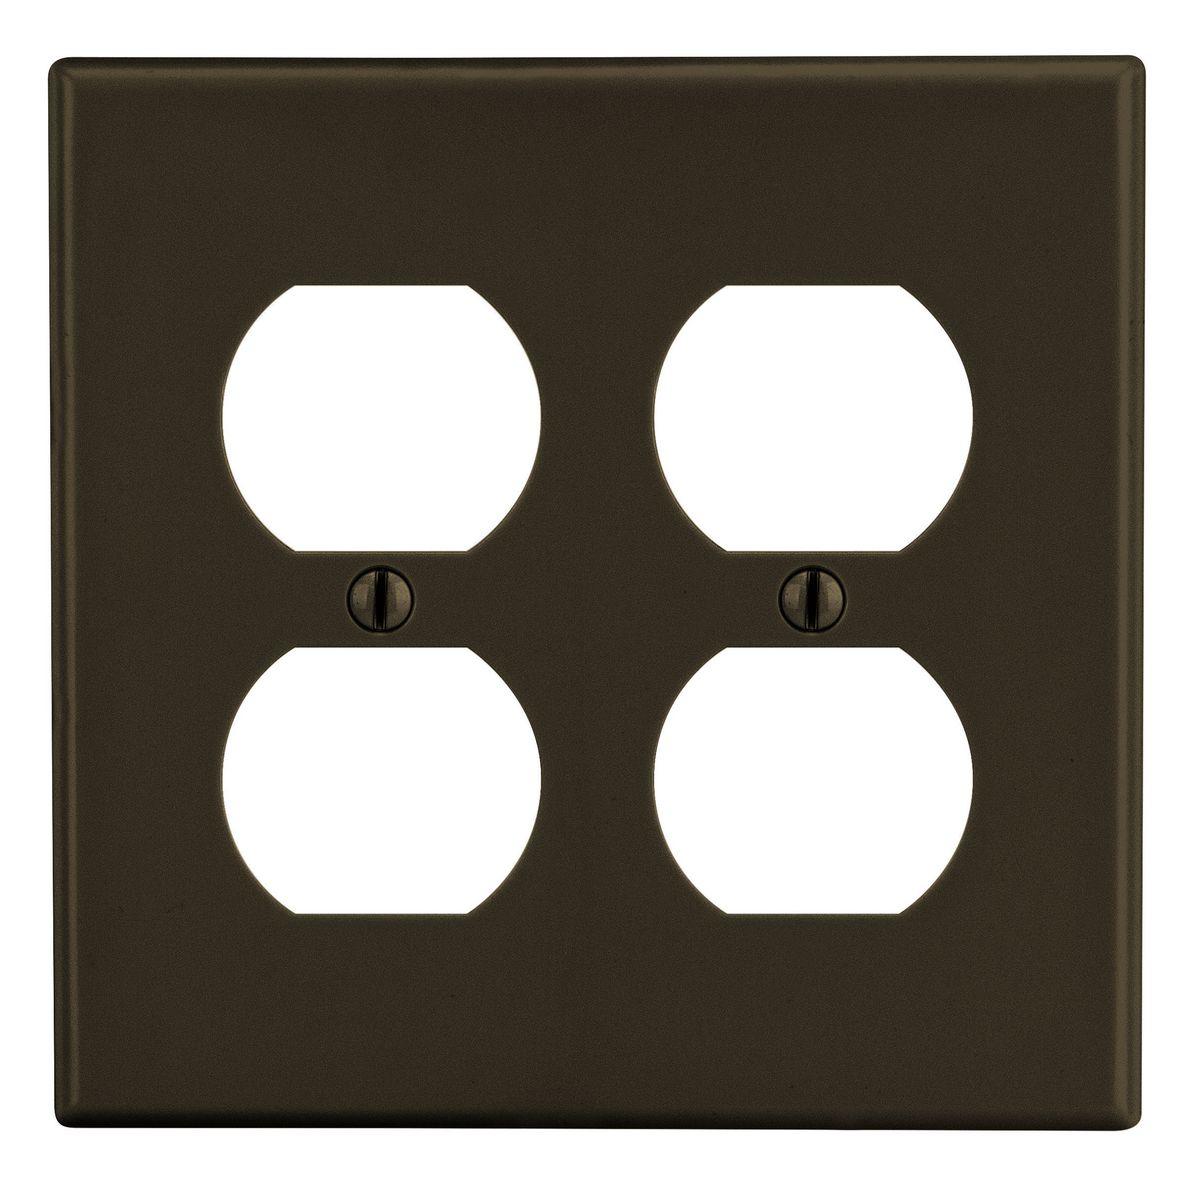 Hubbell PJ82 Wallplate, Mid-Size 2-Gang, 2) Duplex, Brown  ; High-impact, self-extinguishing polycarbonate material ; More Rigid ; Sharp lines and less dimpling ; Smooth satin finish ; Blends into wall with an optimum finish ; Smooth Satin Finish